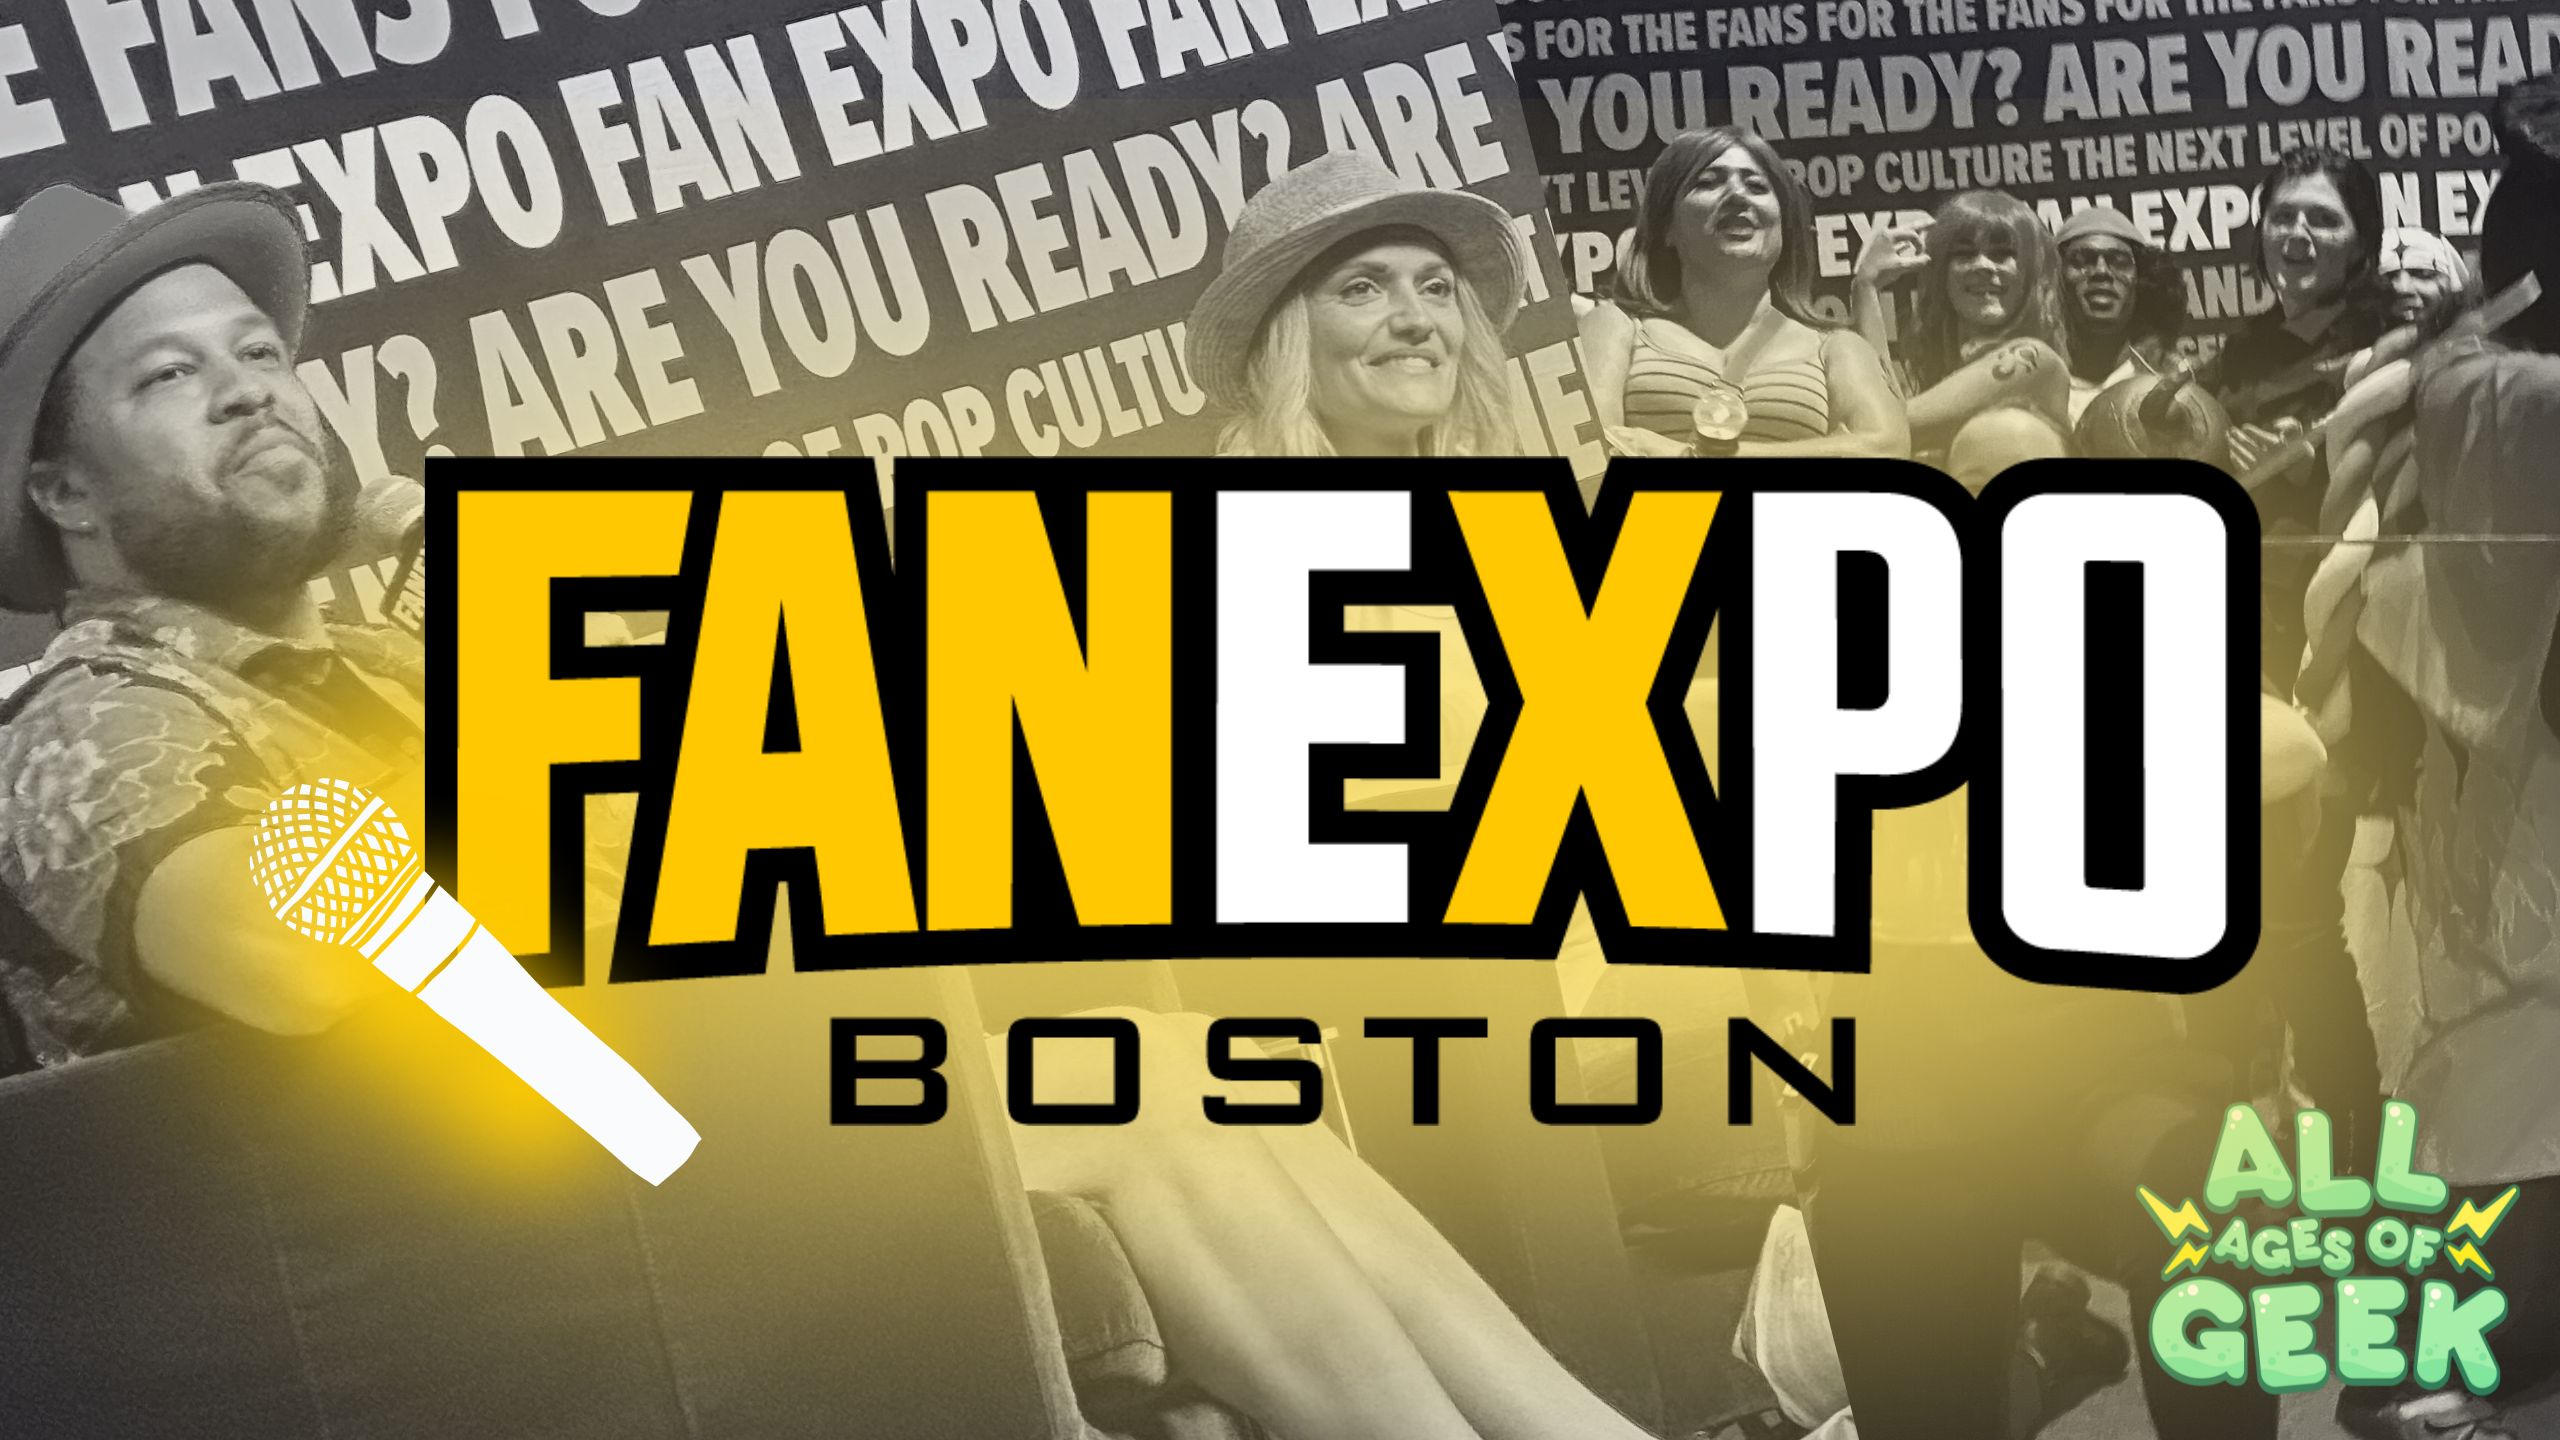 A Voice Actor’s Experience at Fan Expo Boston!